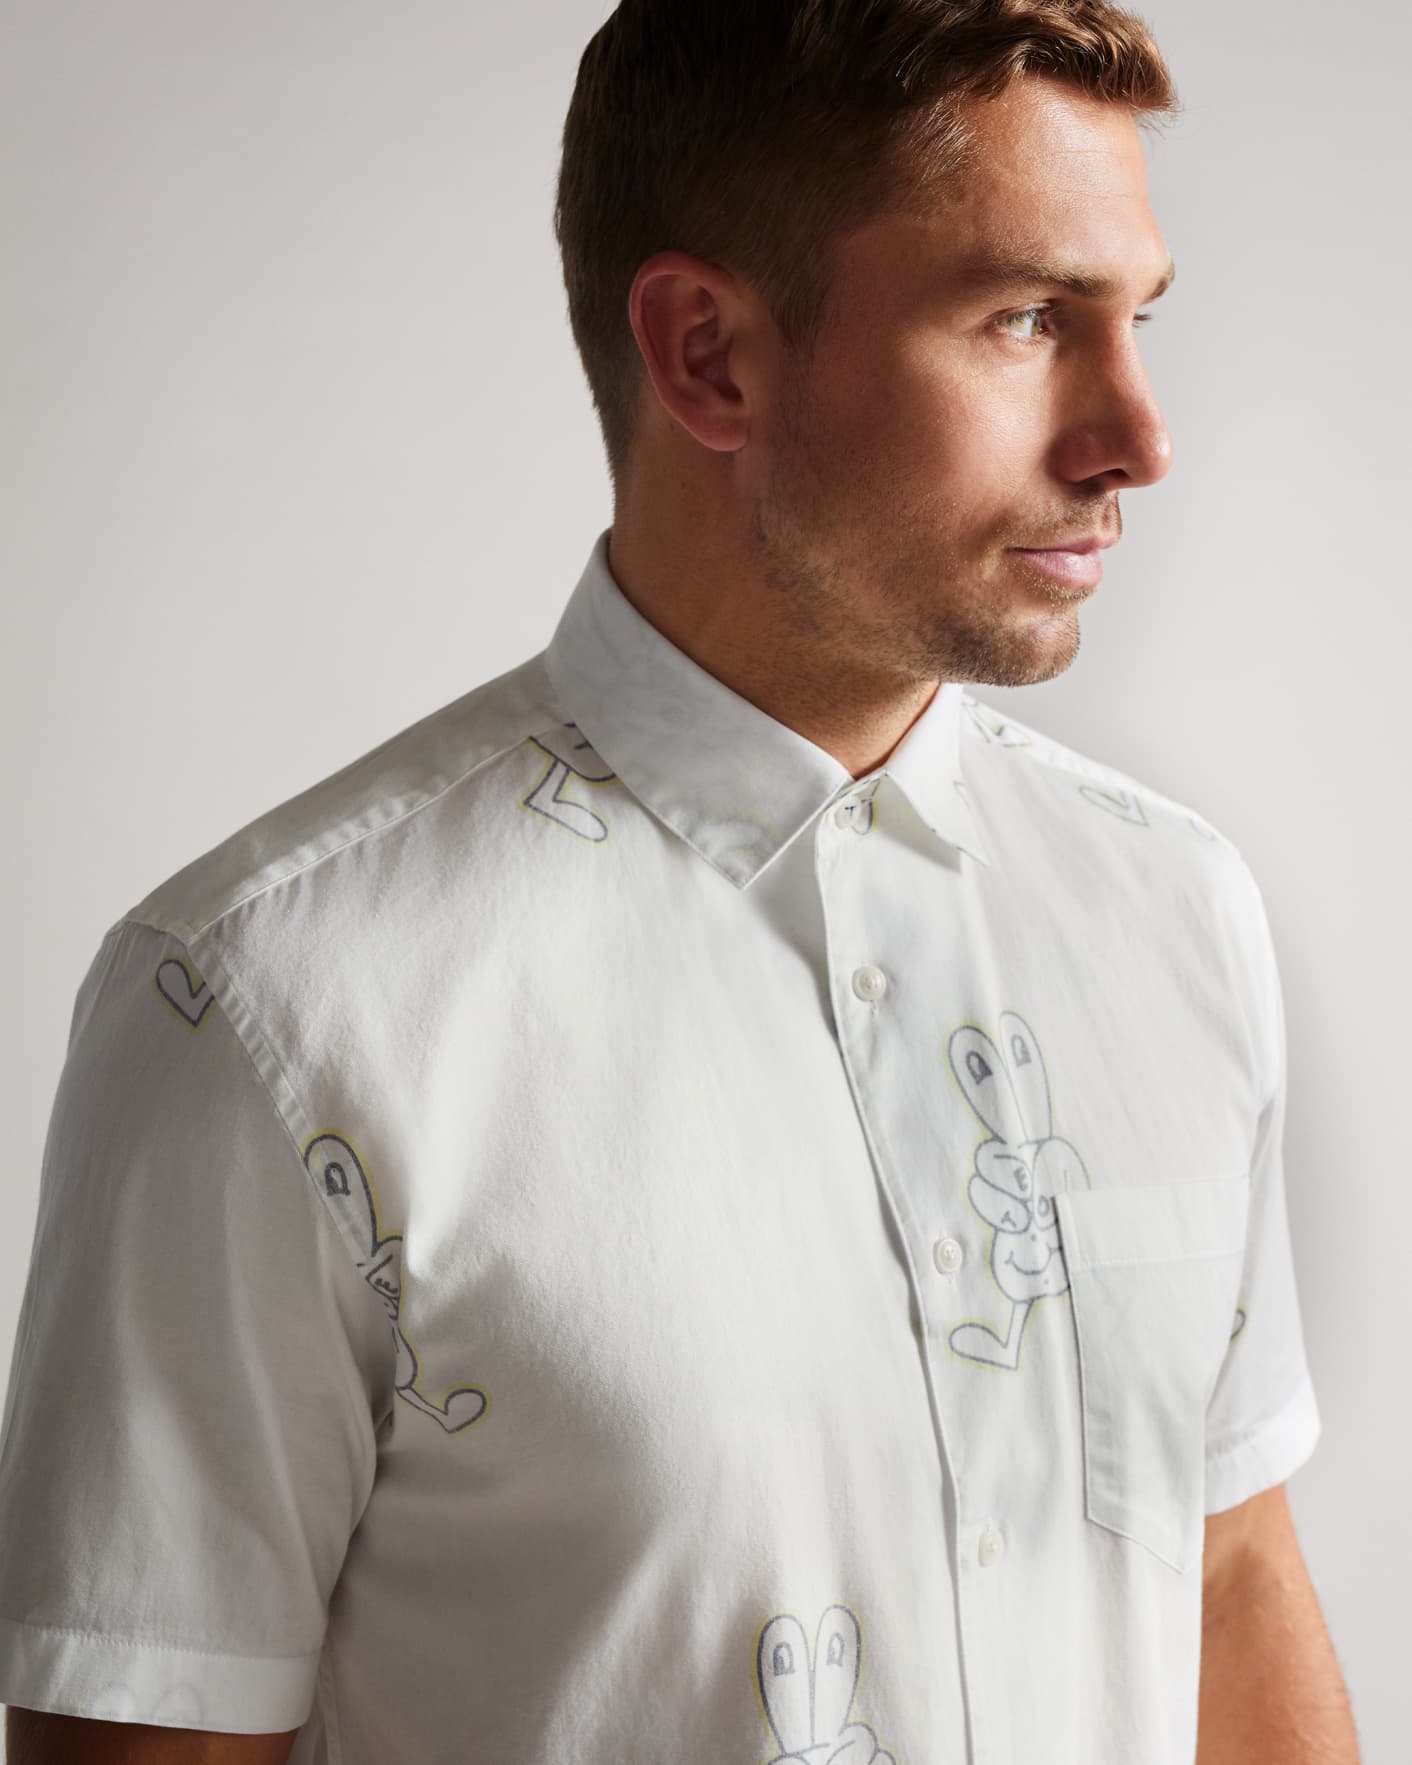 White SS Reverse Printed Character Shirt Ted Baker